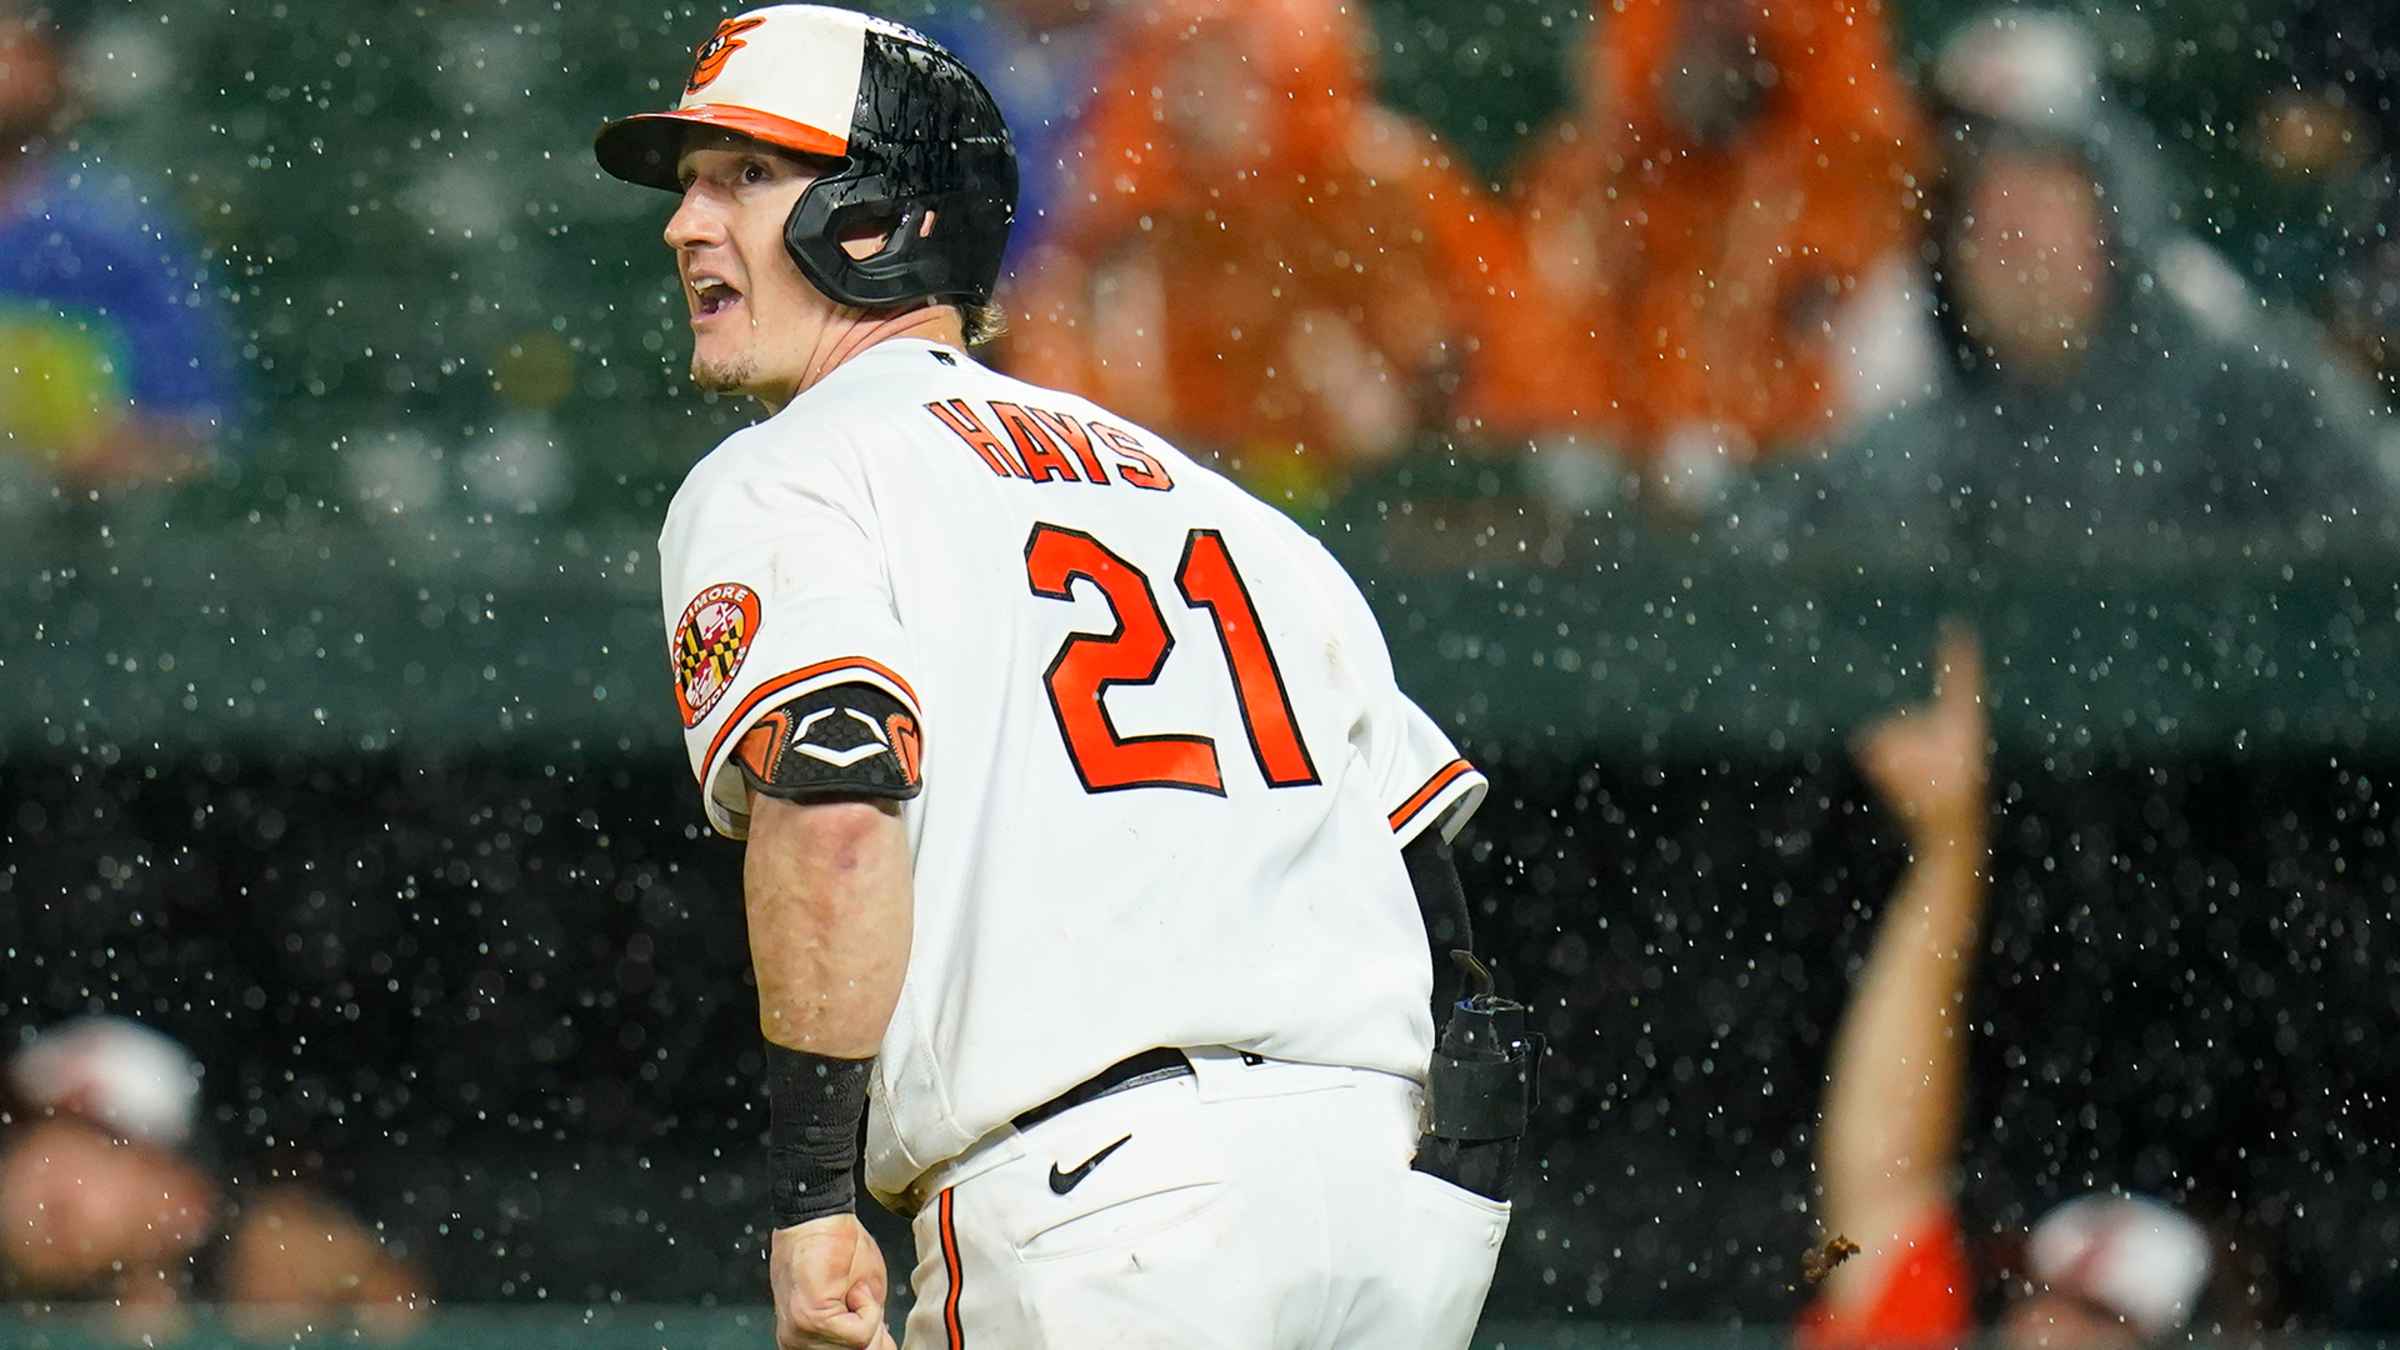 Núñez hits 2 homers to carry Orioles past skidding Mets